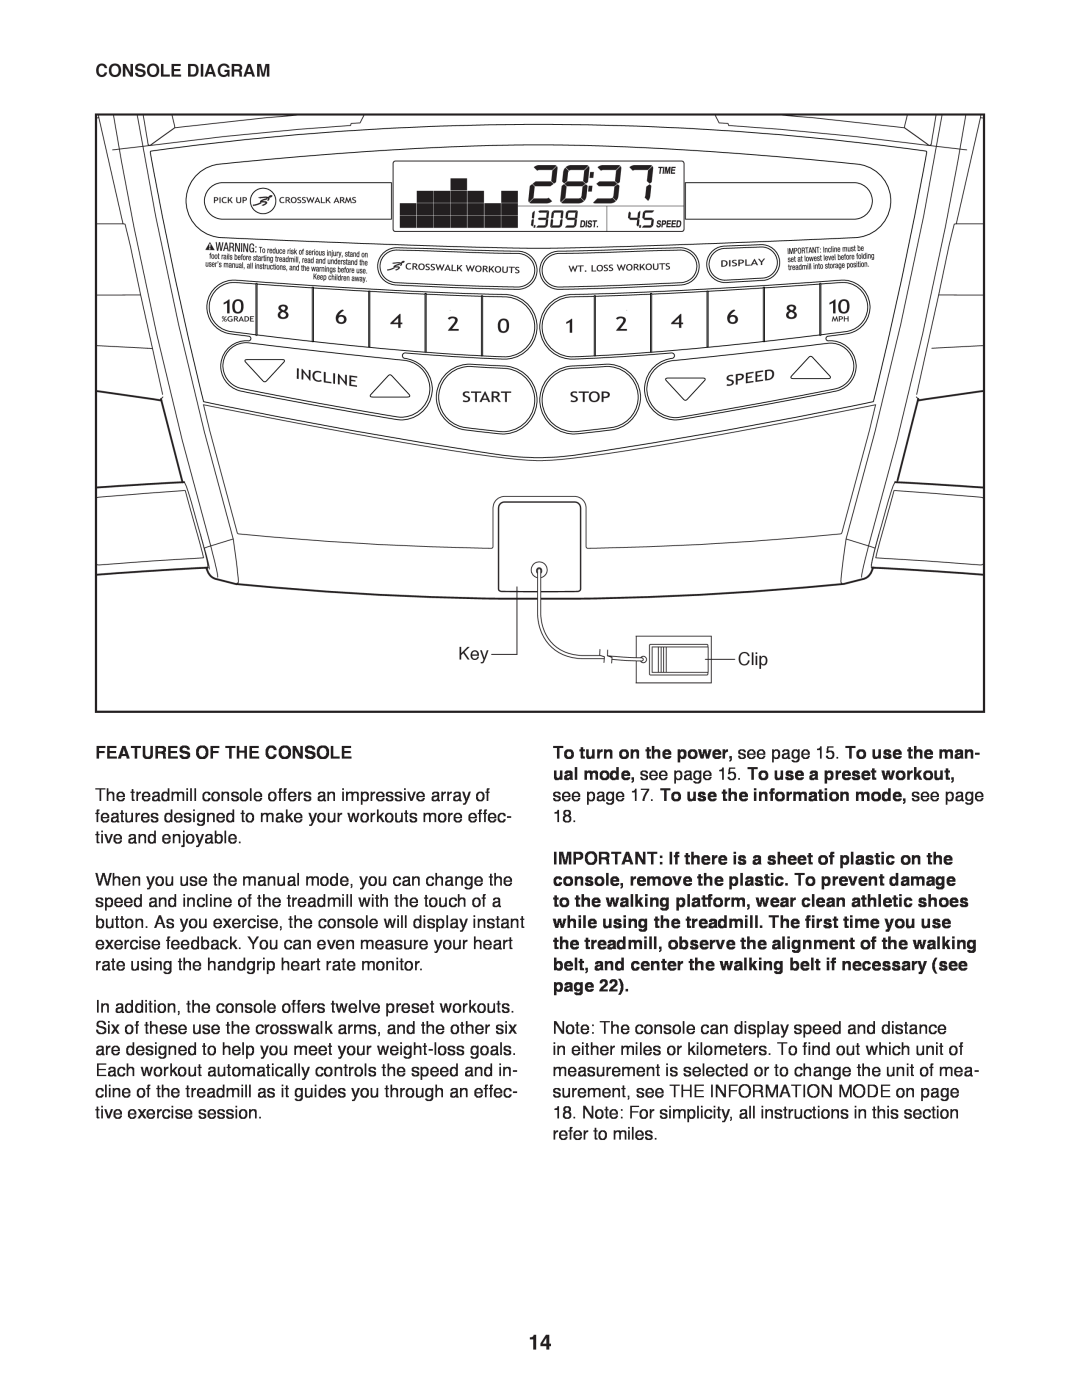 Weslo WLTL39312.0 user manual Console Diagram, Features Of The Console 